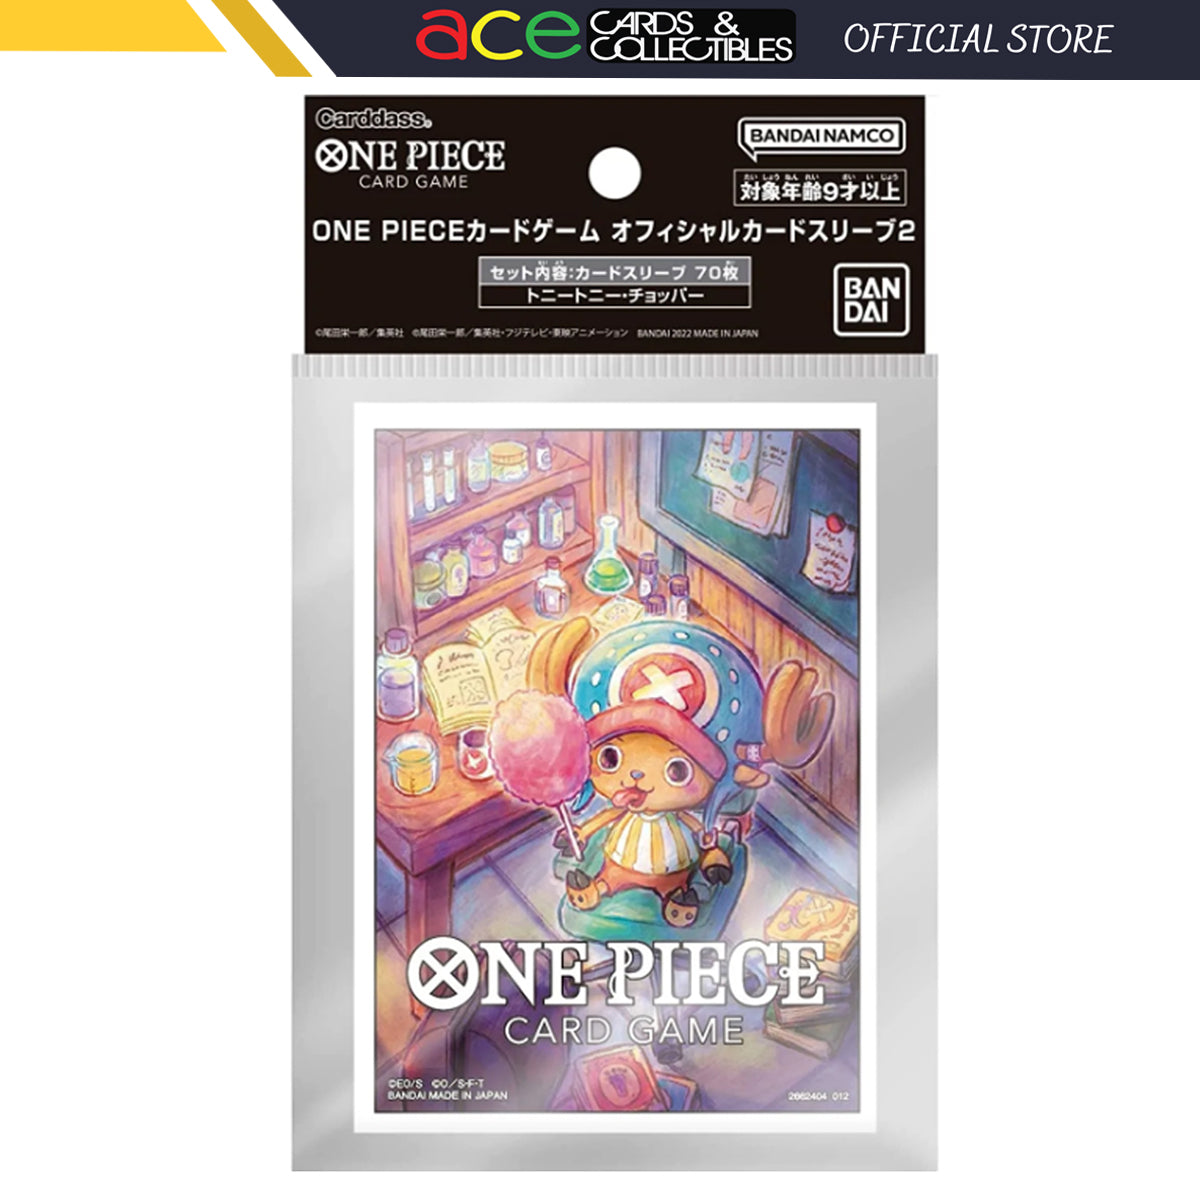 One Piece Card Game Official Deck Sleeves "Tony Tony Chopper" (Vol. 2)-Bandai Namco-Ace Cards & Collectibles